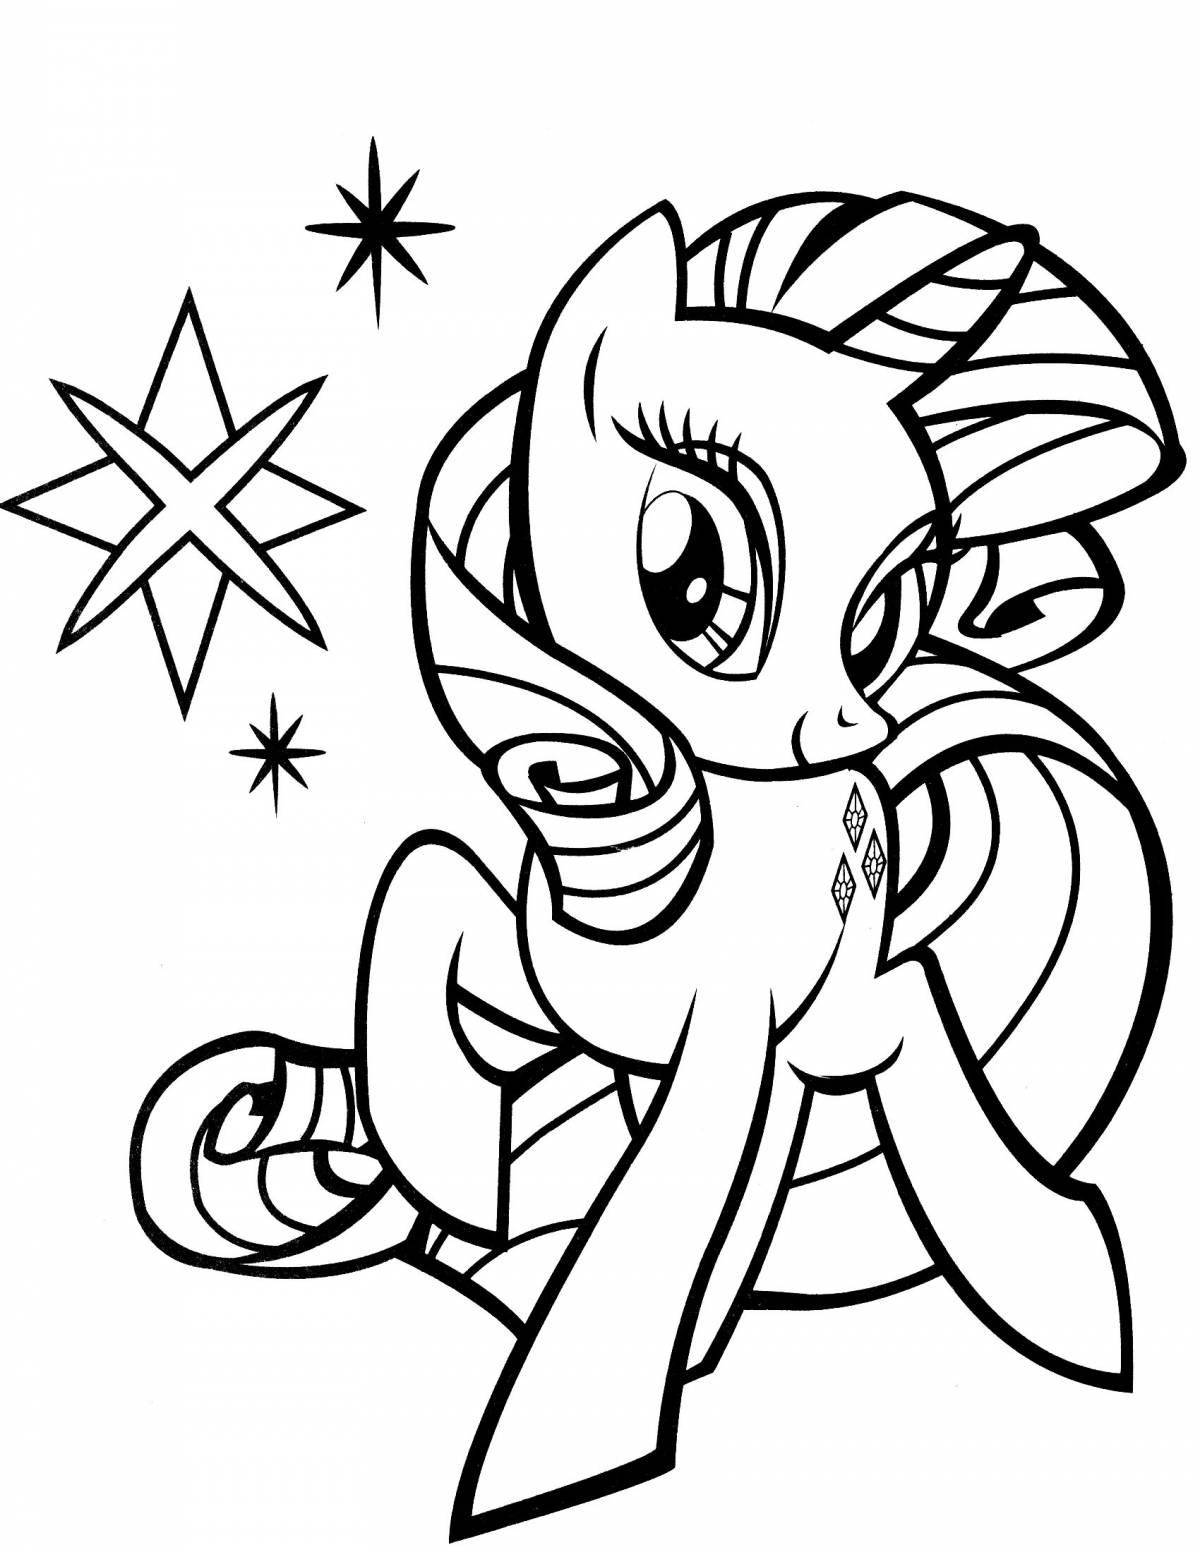 Exquisite pony coloring for girls